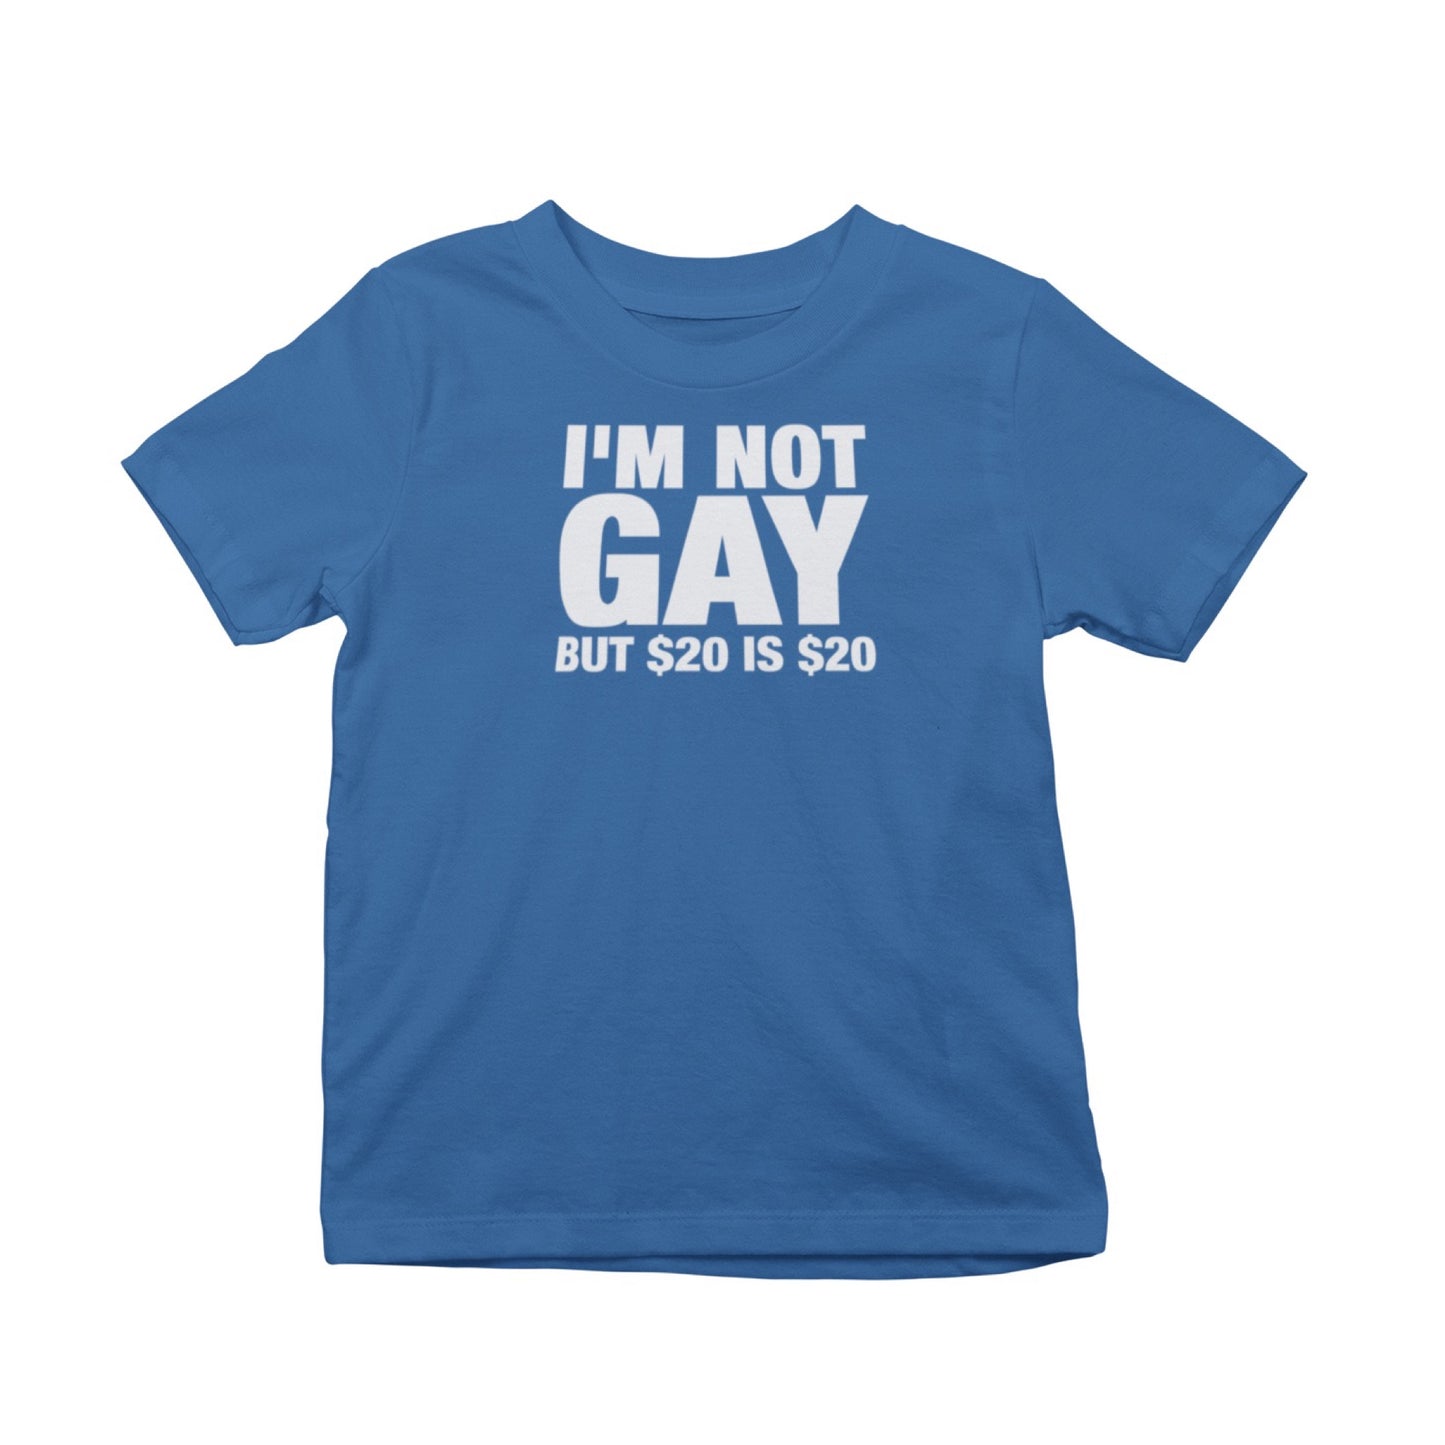 I'm Not Gay But $20 Is $20 T-Shirt